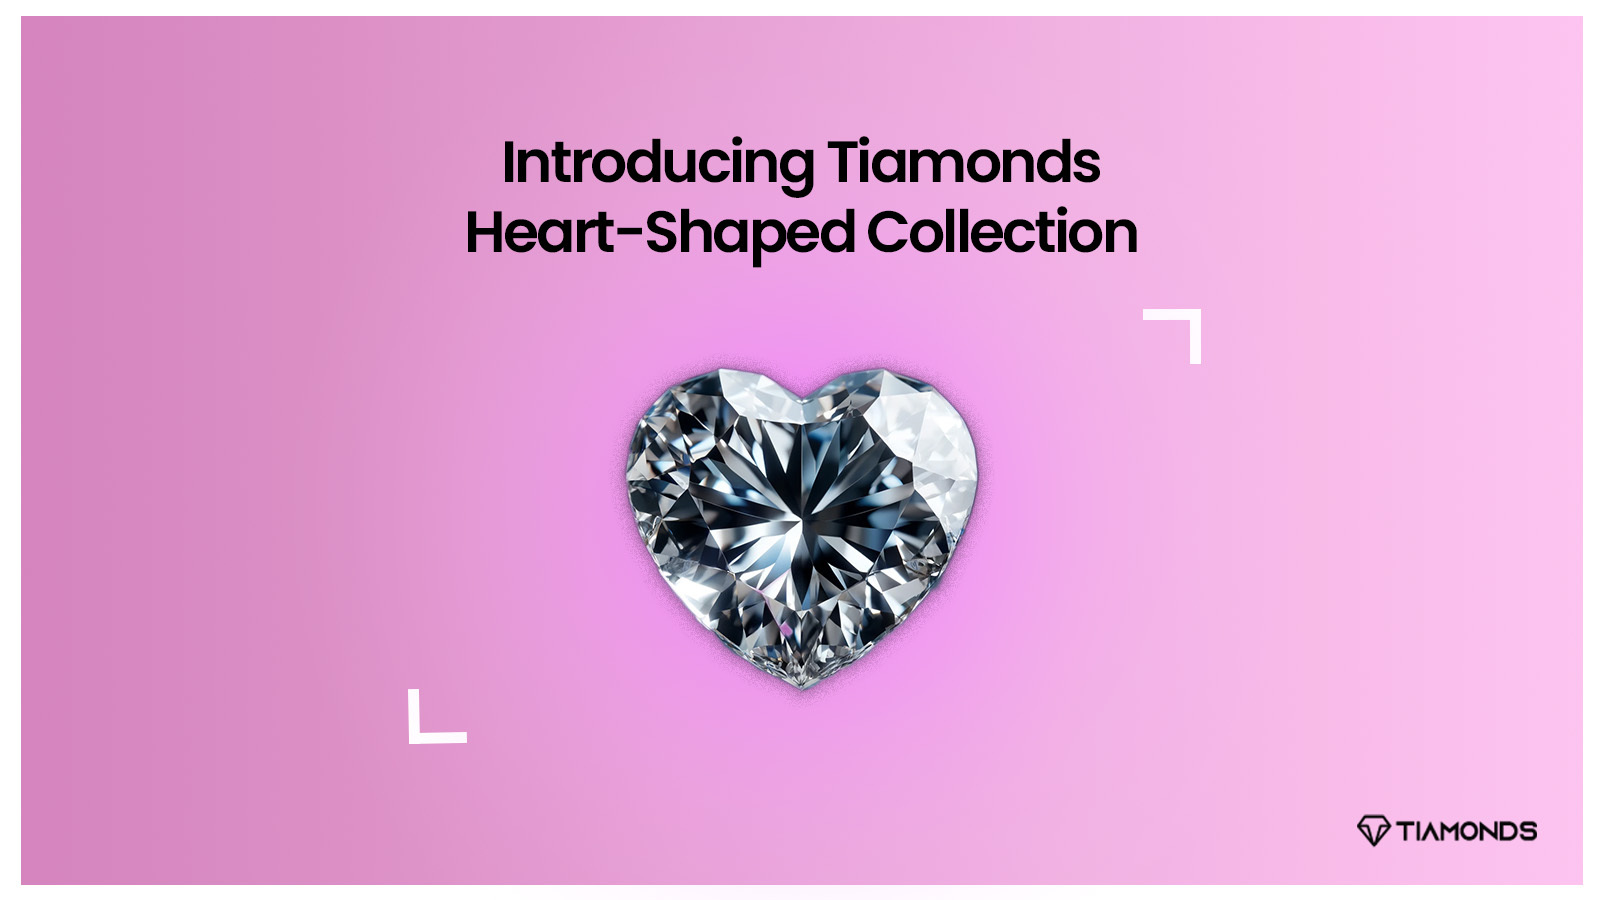 Introducing Tiamonds Heart-Shaped Collection